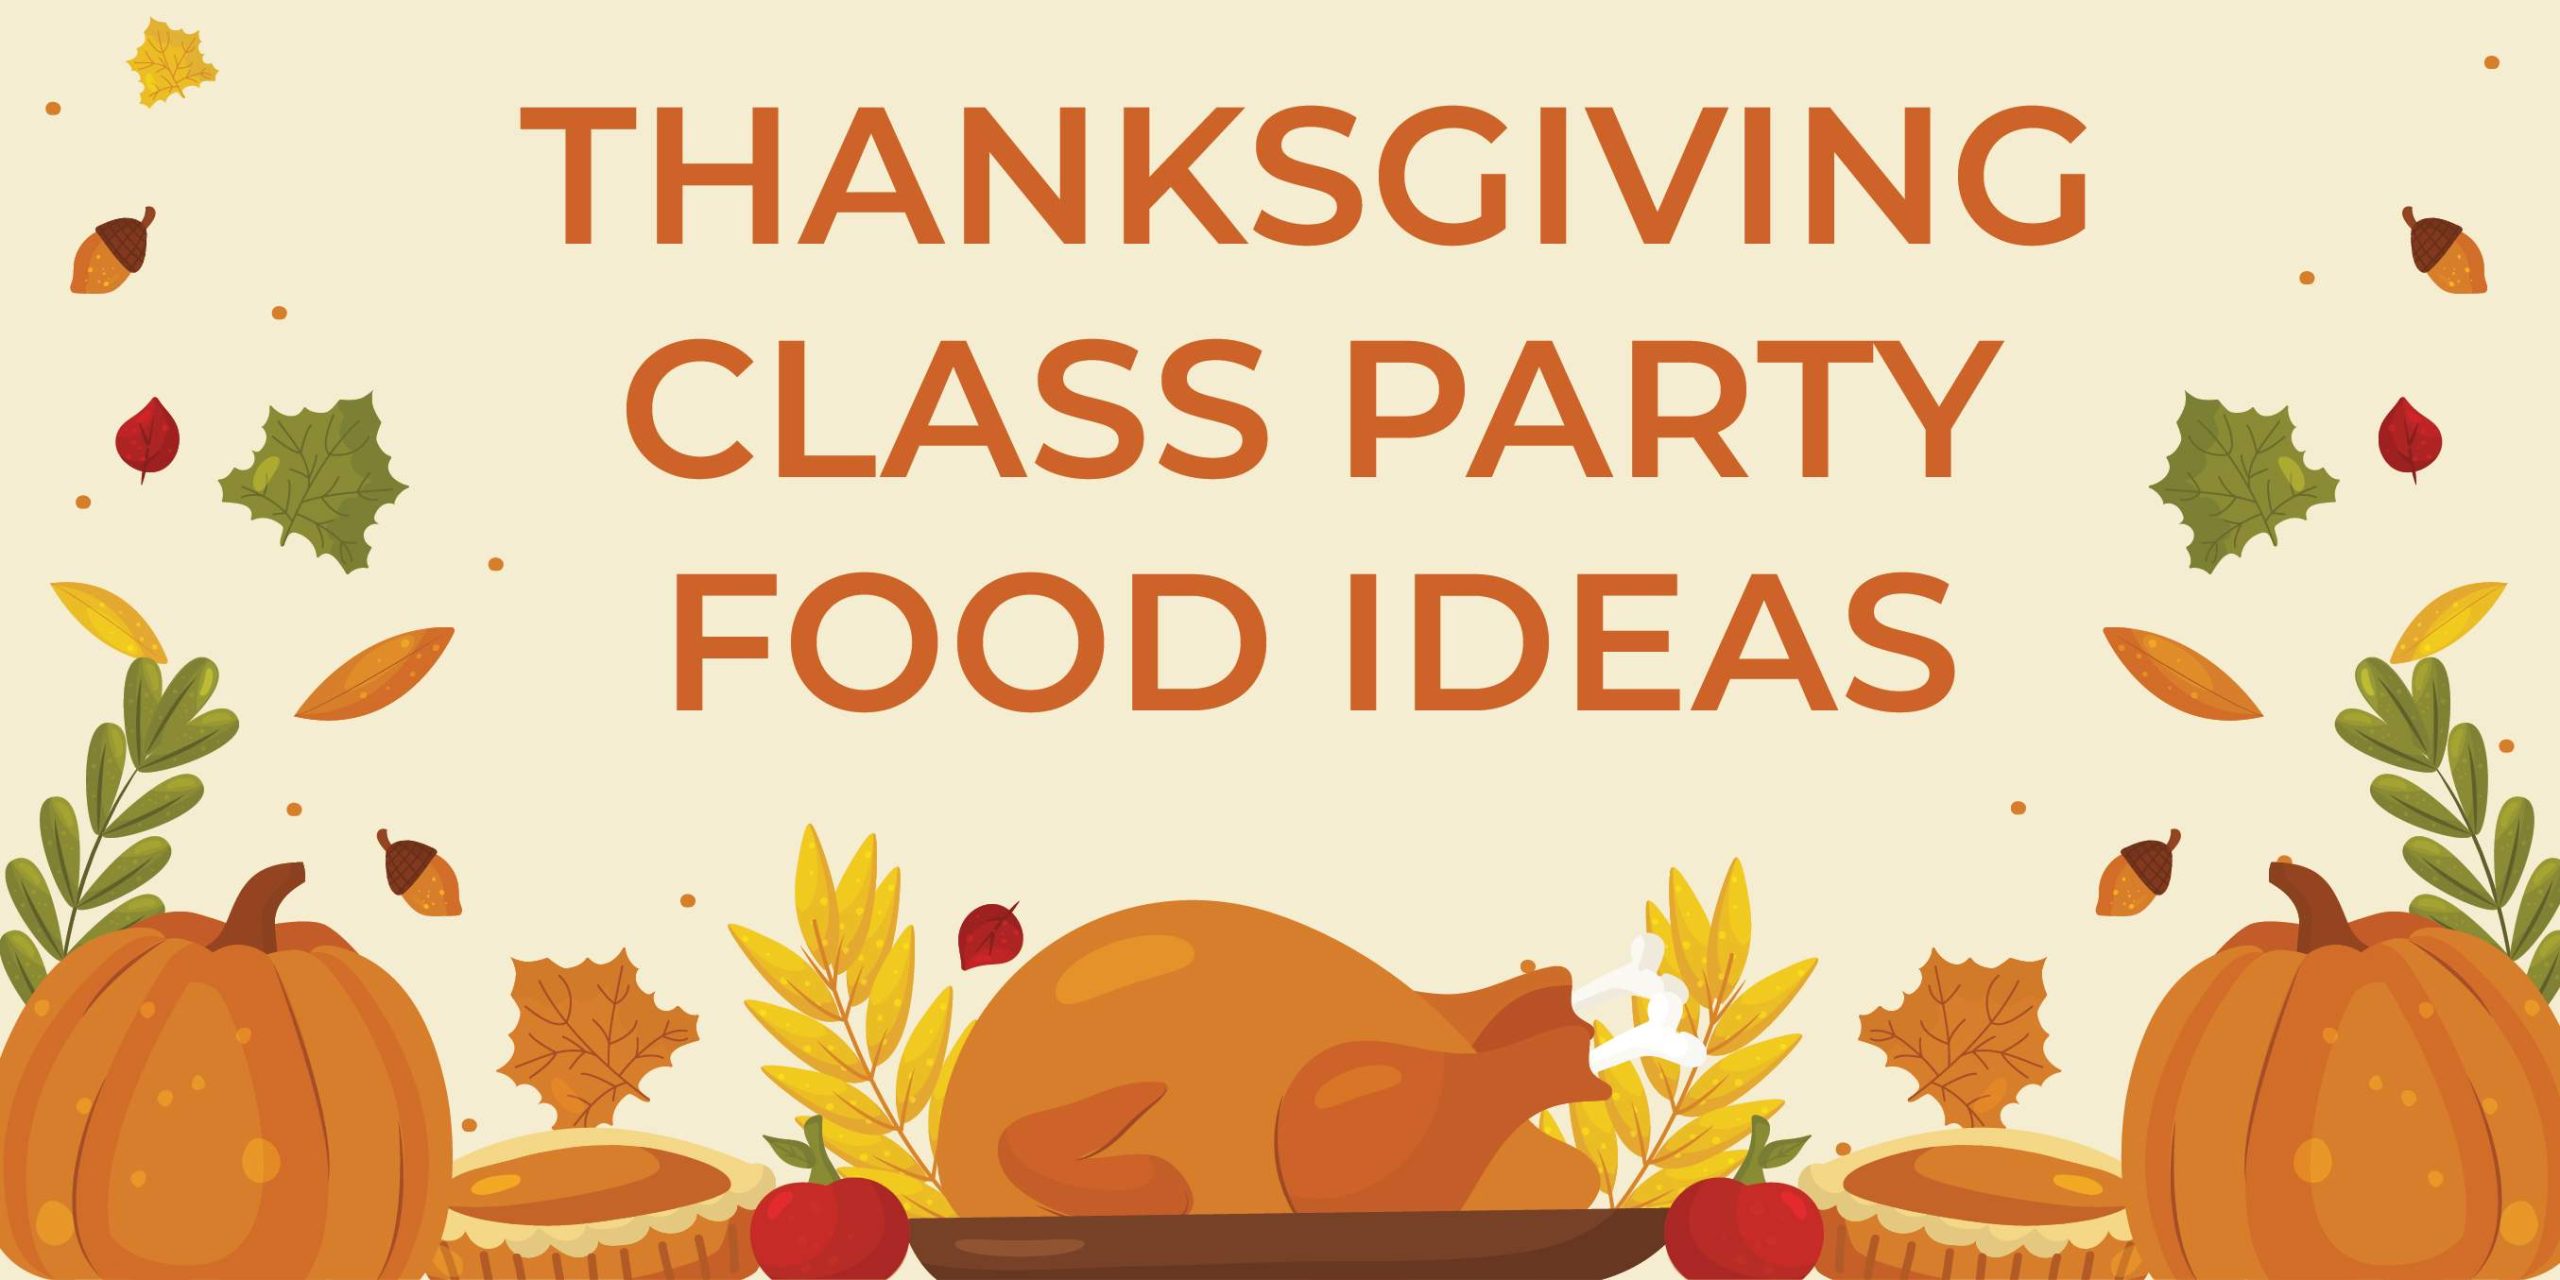 Thanksgiving Class Party Food Ideas